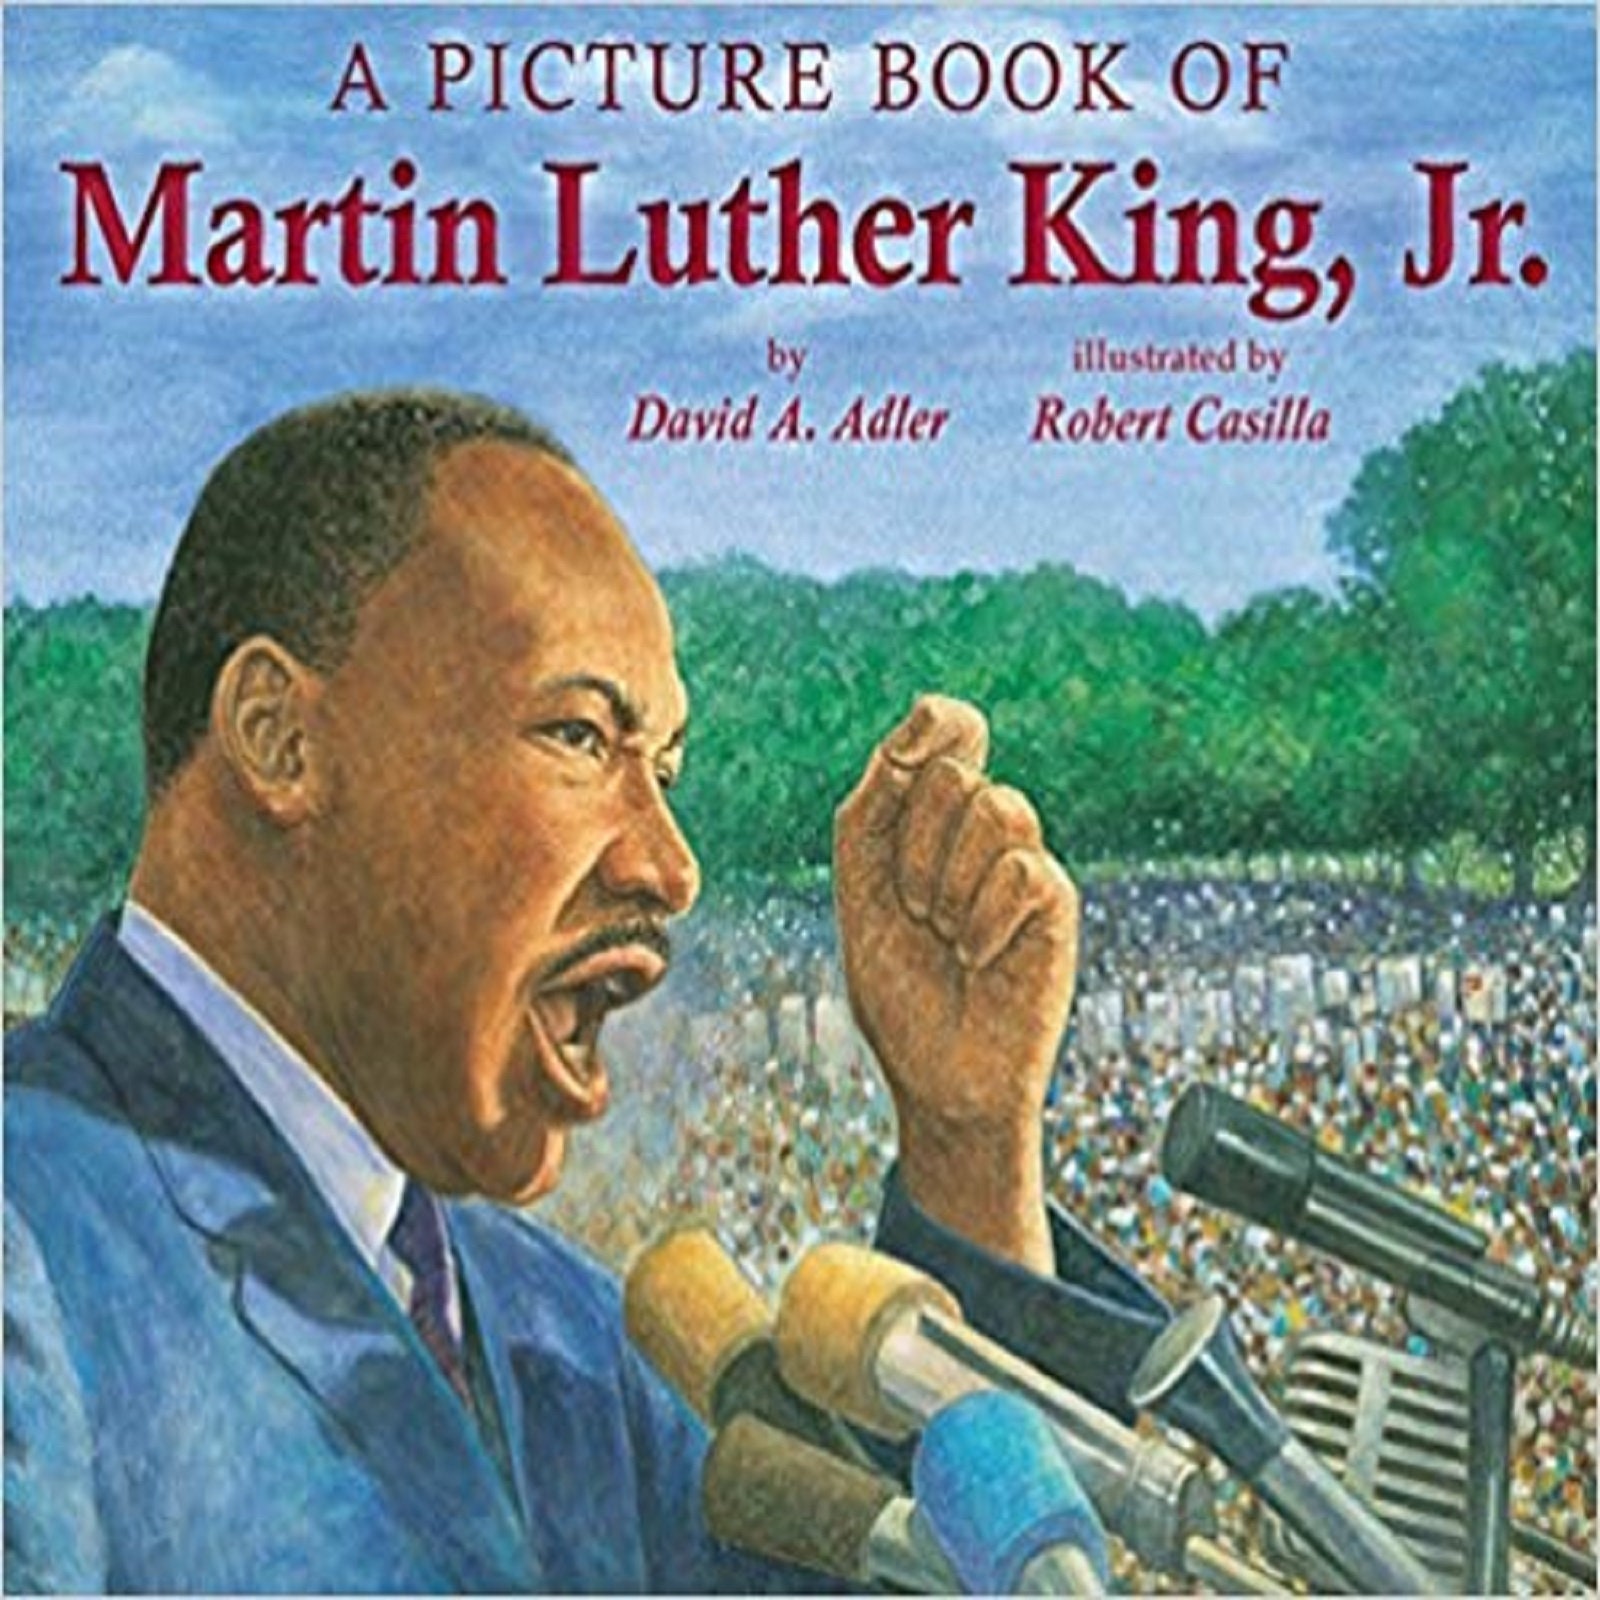 A Picture Book of Martin Luther King Jr. (Picture Book Biography)